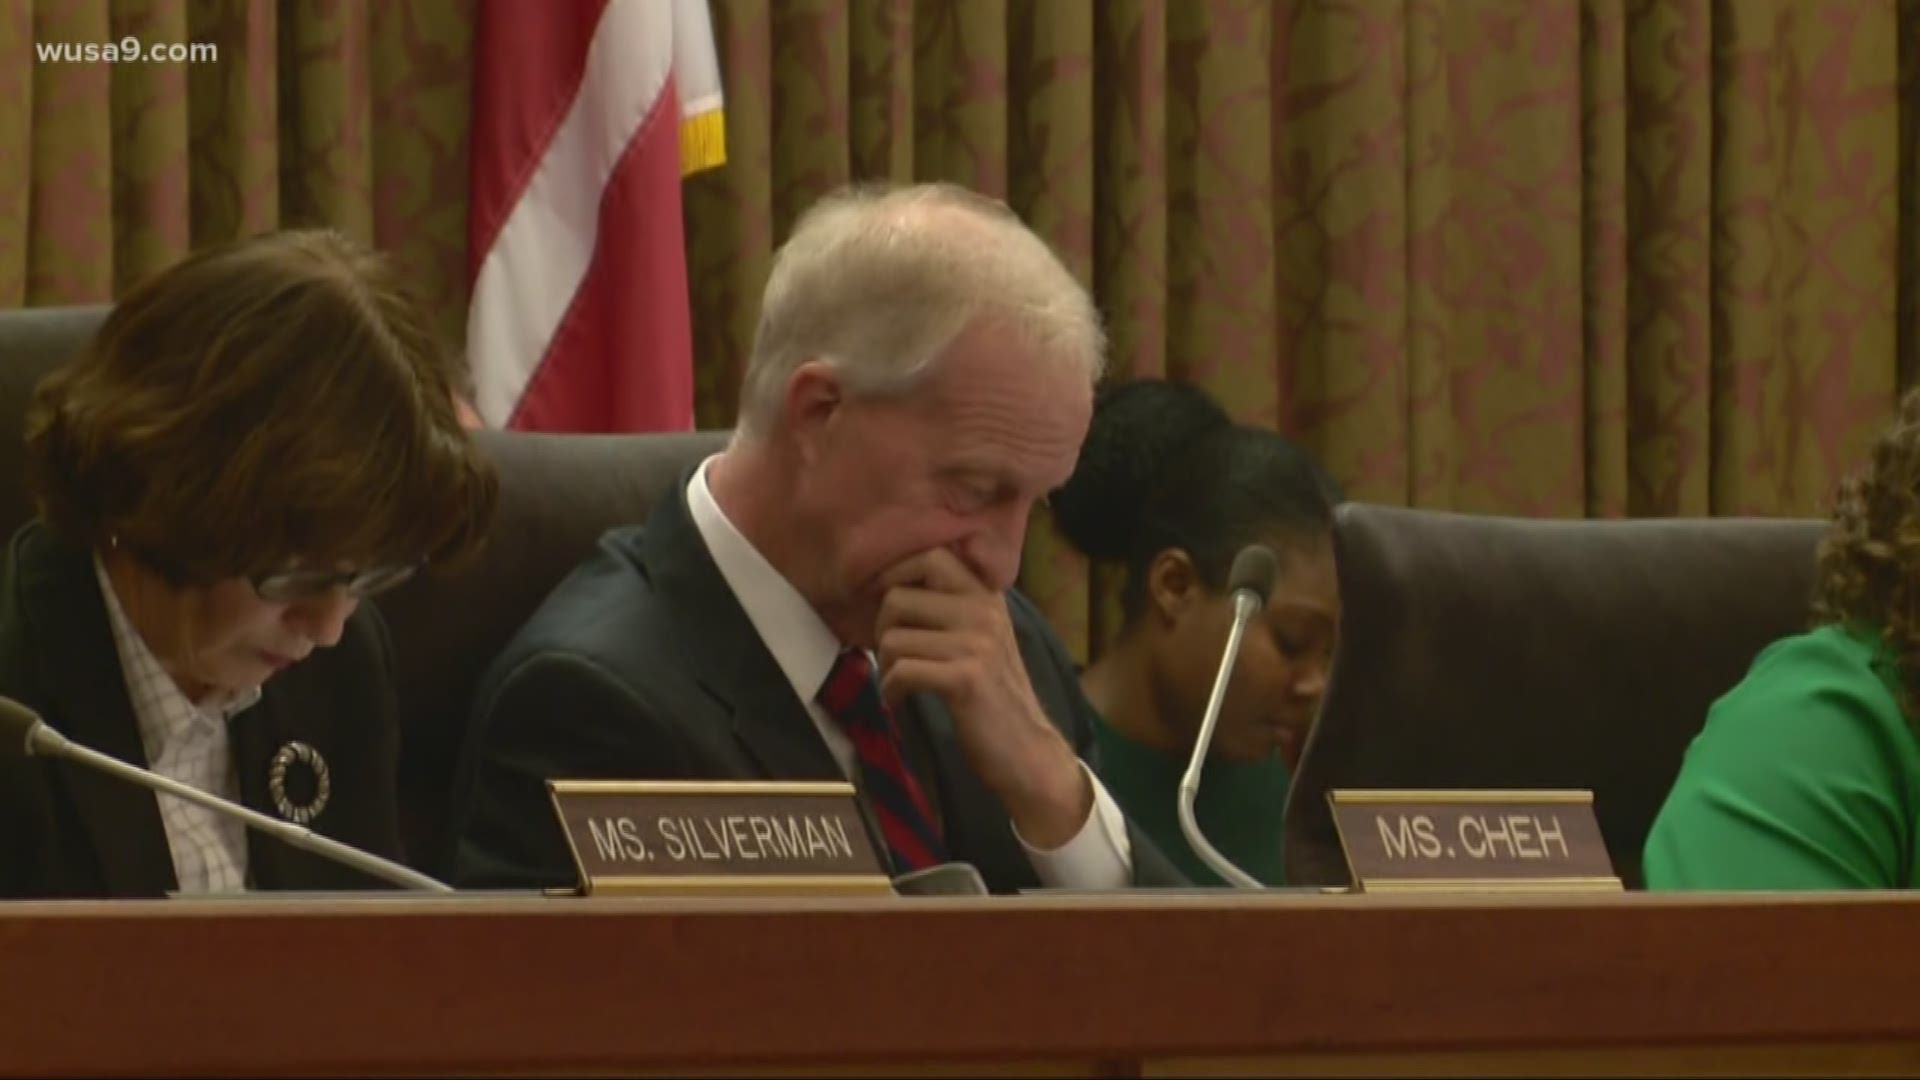 Today the D.C. Council voted to remove Jack Evans from office.